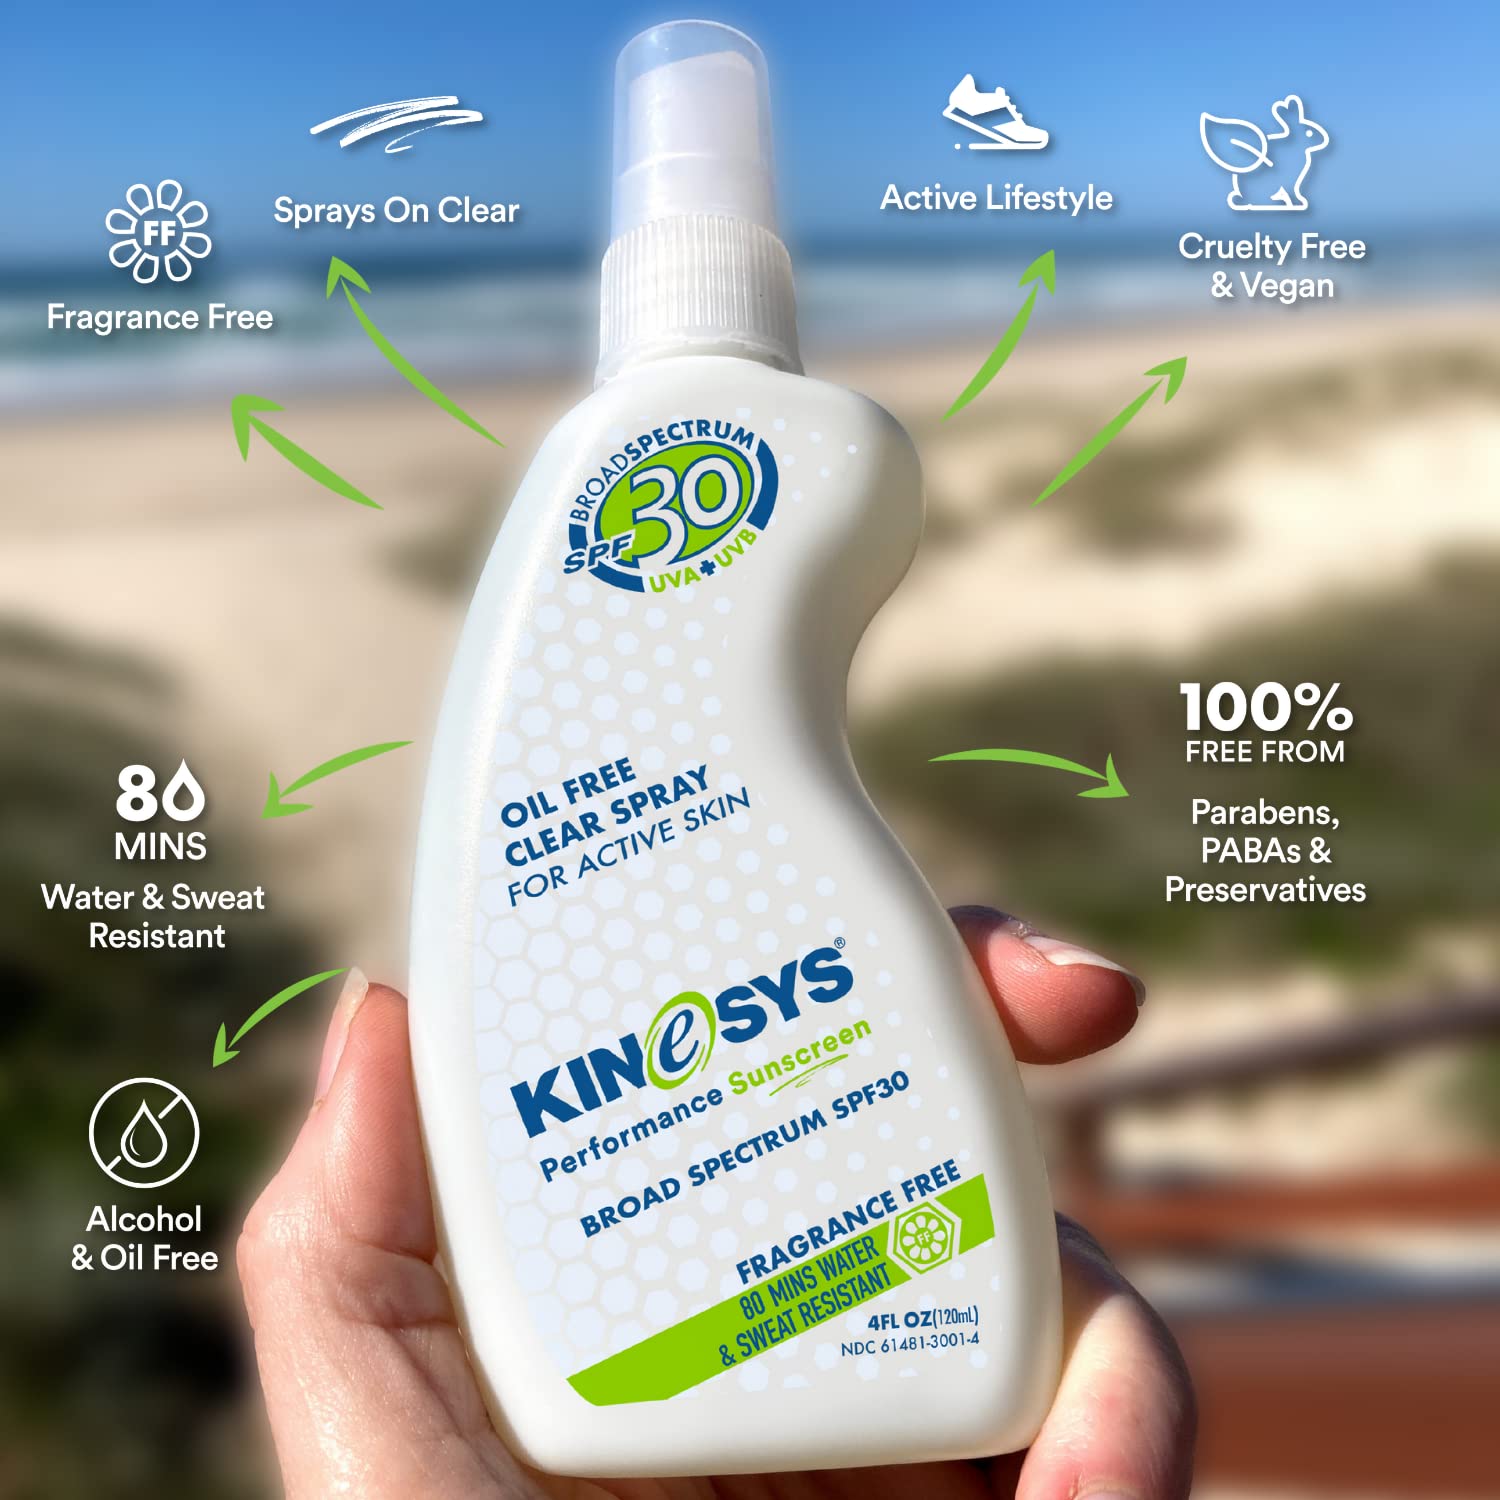 KINeSYS Fragrance Free Clear Spray Sunscreen for sensitive skin, SPF 30, Hypoallergenic, Broad Spectrum UVA/UVB protection for Face & Body Alcohol, PABA and Oxybenzone FREE, 700 Sprays, 4 fl. oz